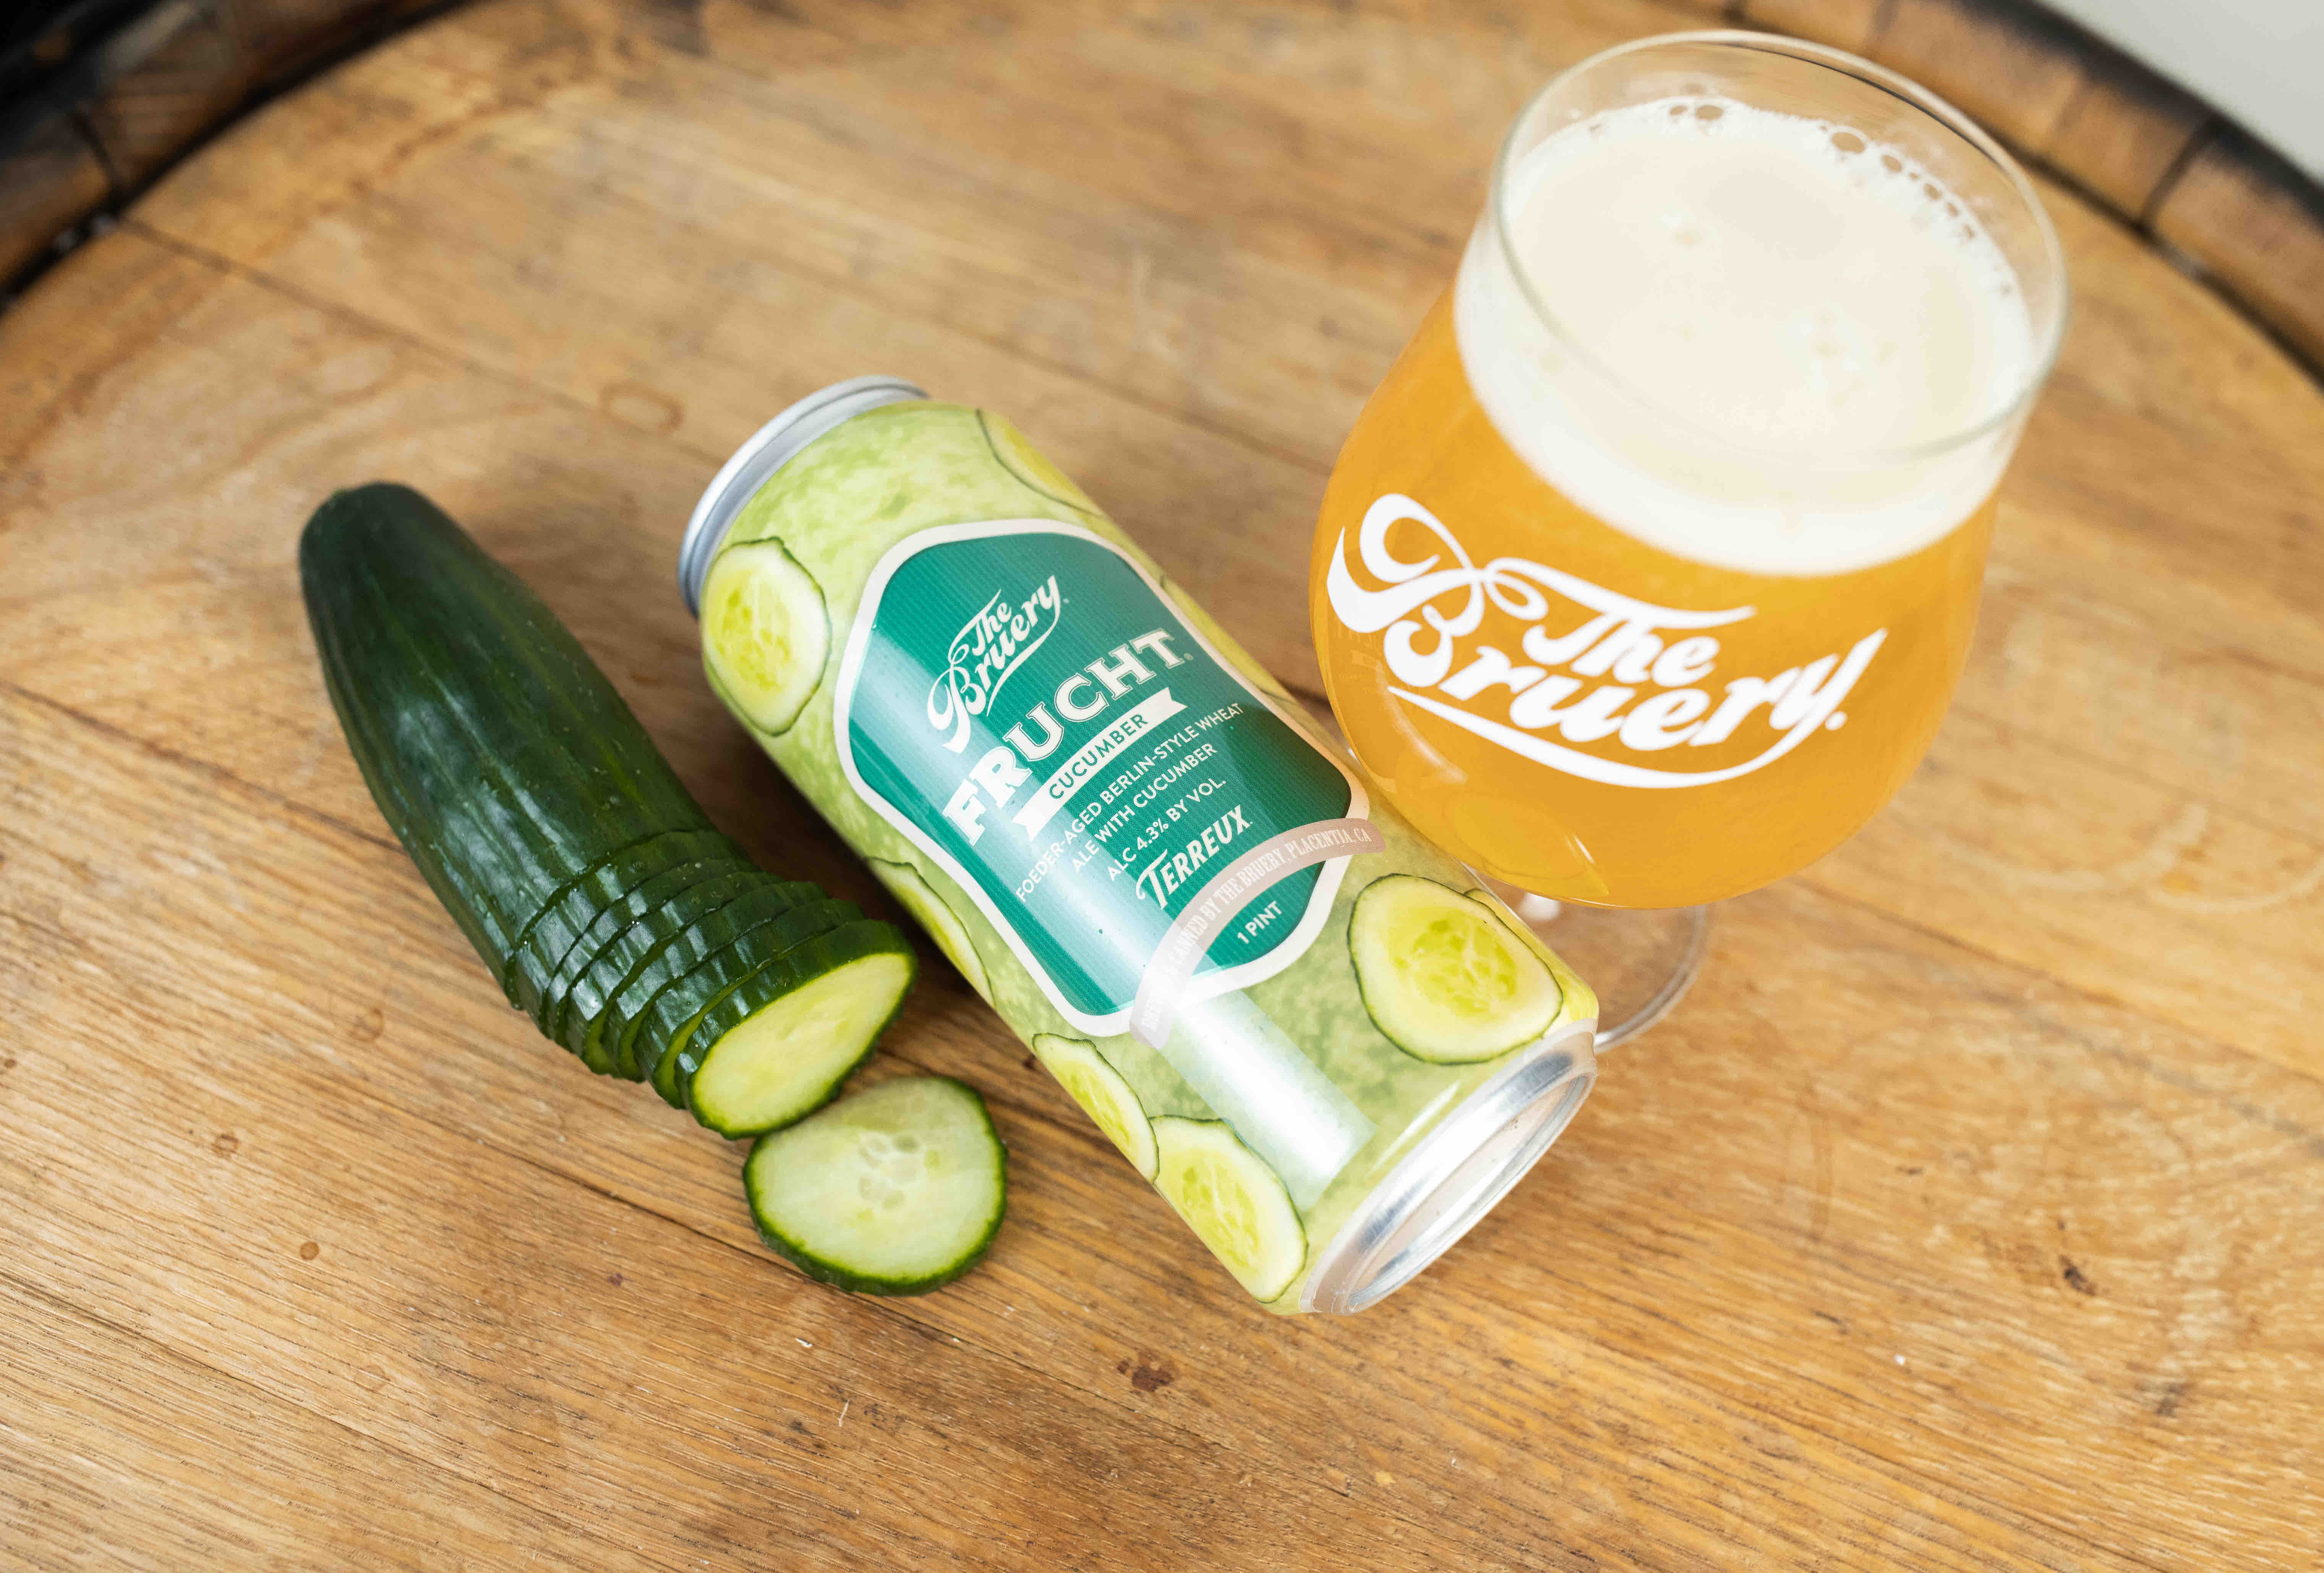 image of Frucht Cucumber courtesy of The Bruery